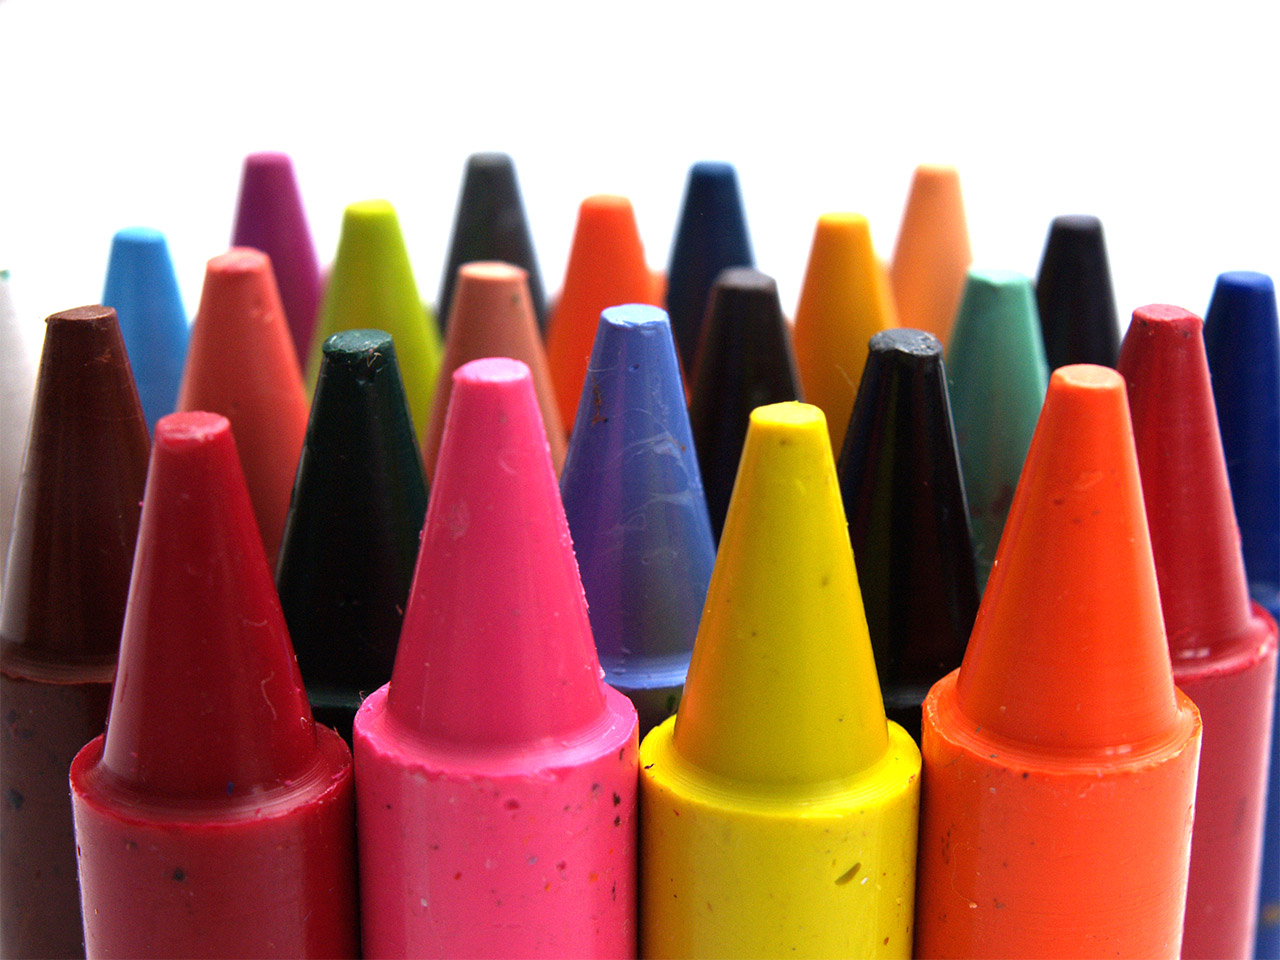 Crayons Resized For Wallpaper By Bliss Imaging